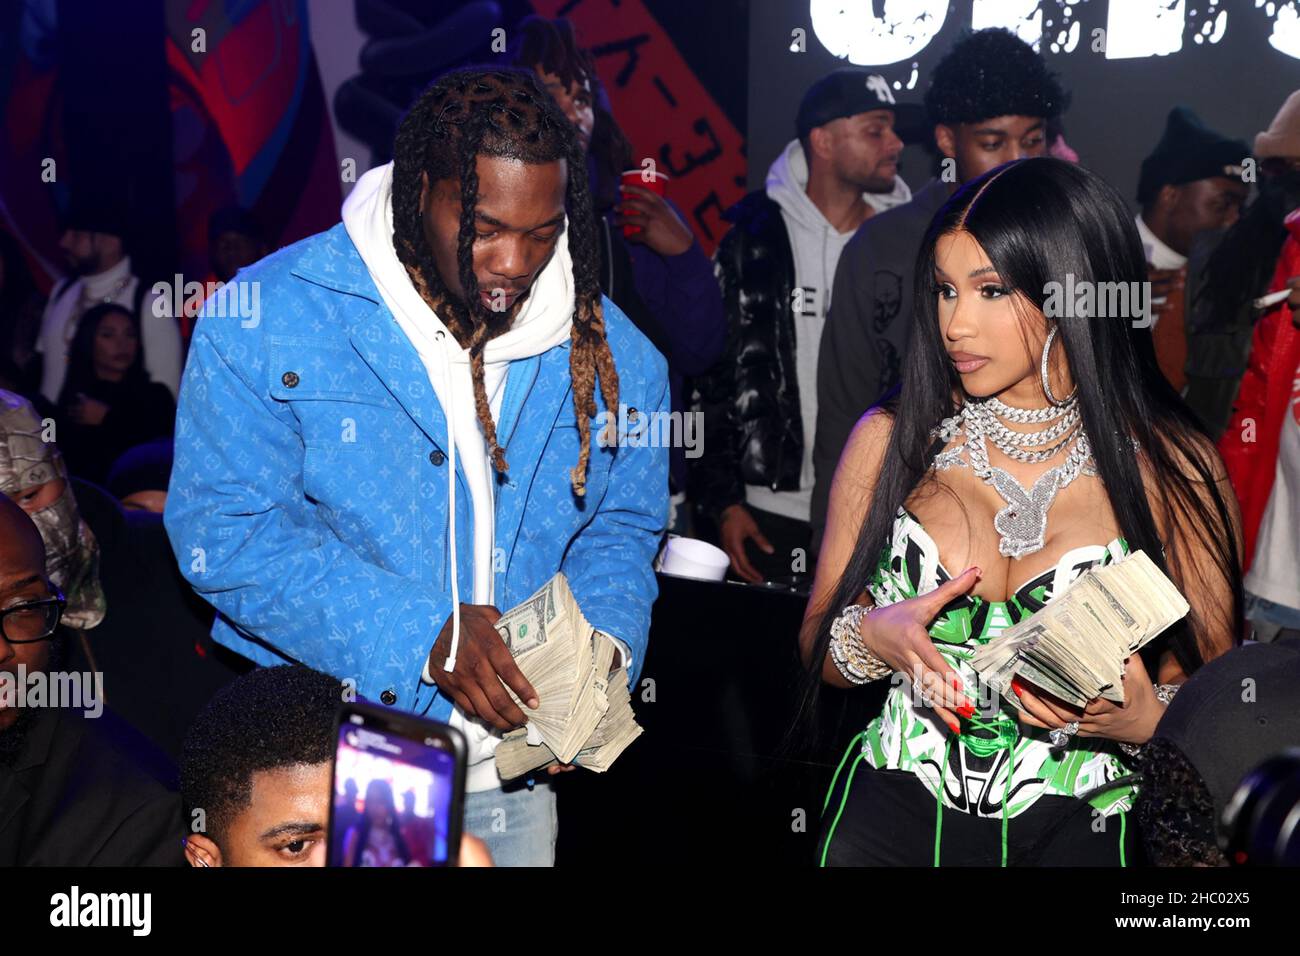 Los Angeles, Ca. 21st Dec, 2021. Cardi B and Offset at Offset's 30th Birthday Party hosted by Cardi B at Sneakertopia LA in Los Angeles, California on December 21, 2021. Credit: Walik Goshorn/Media Punch/Alamy Live News Stock Photo